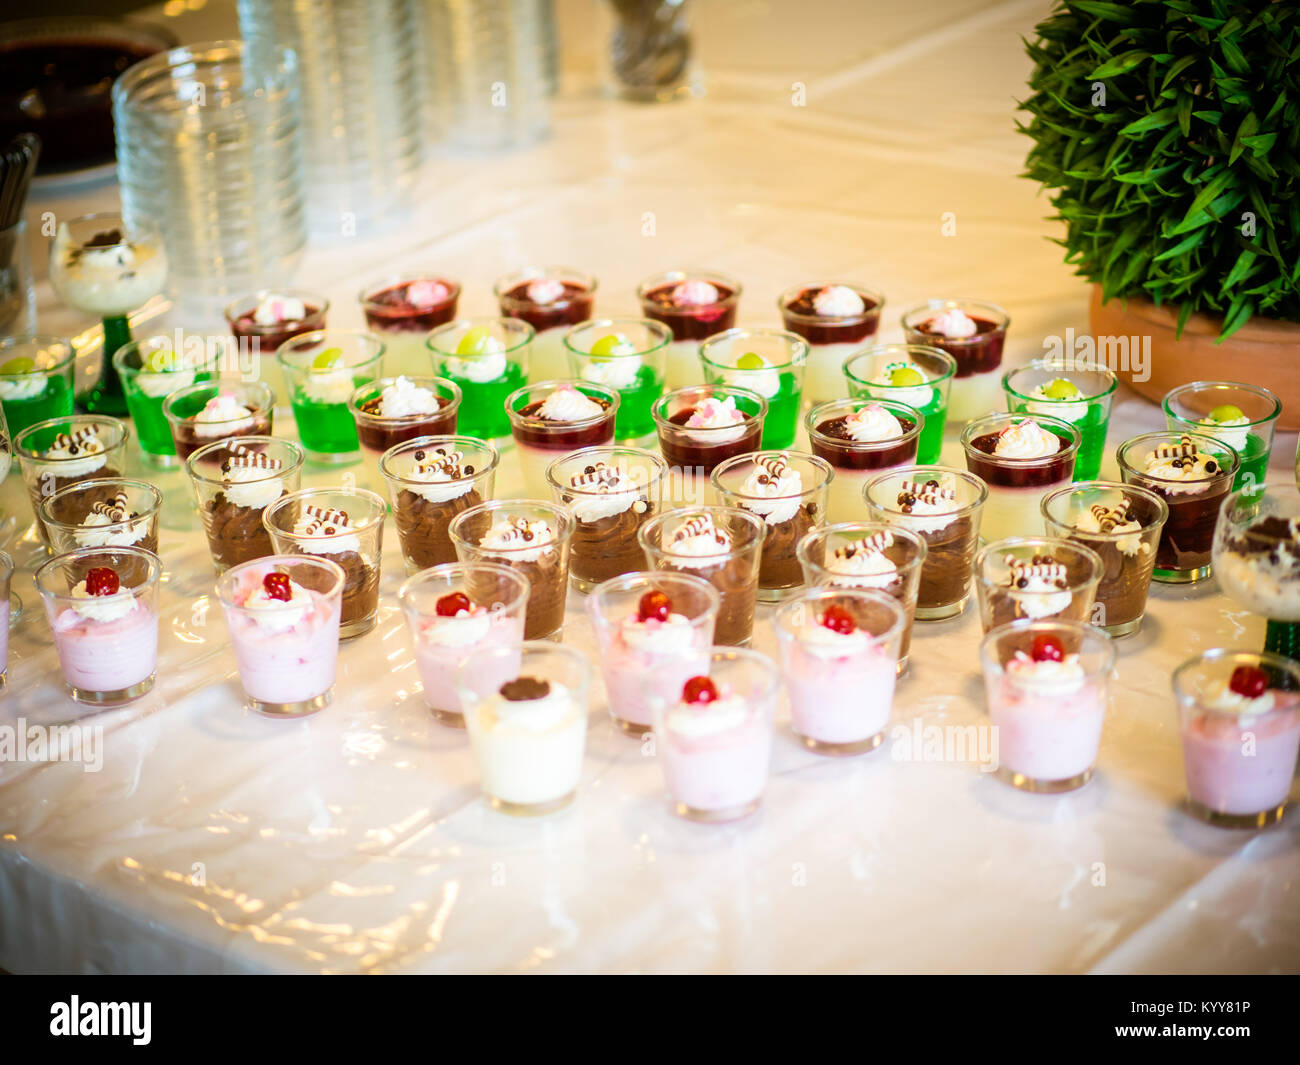 Glasses with cream desserts and berries Stock Photo